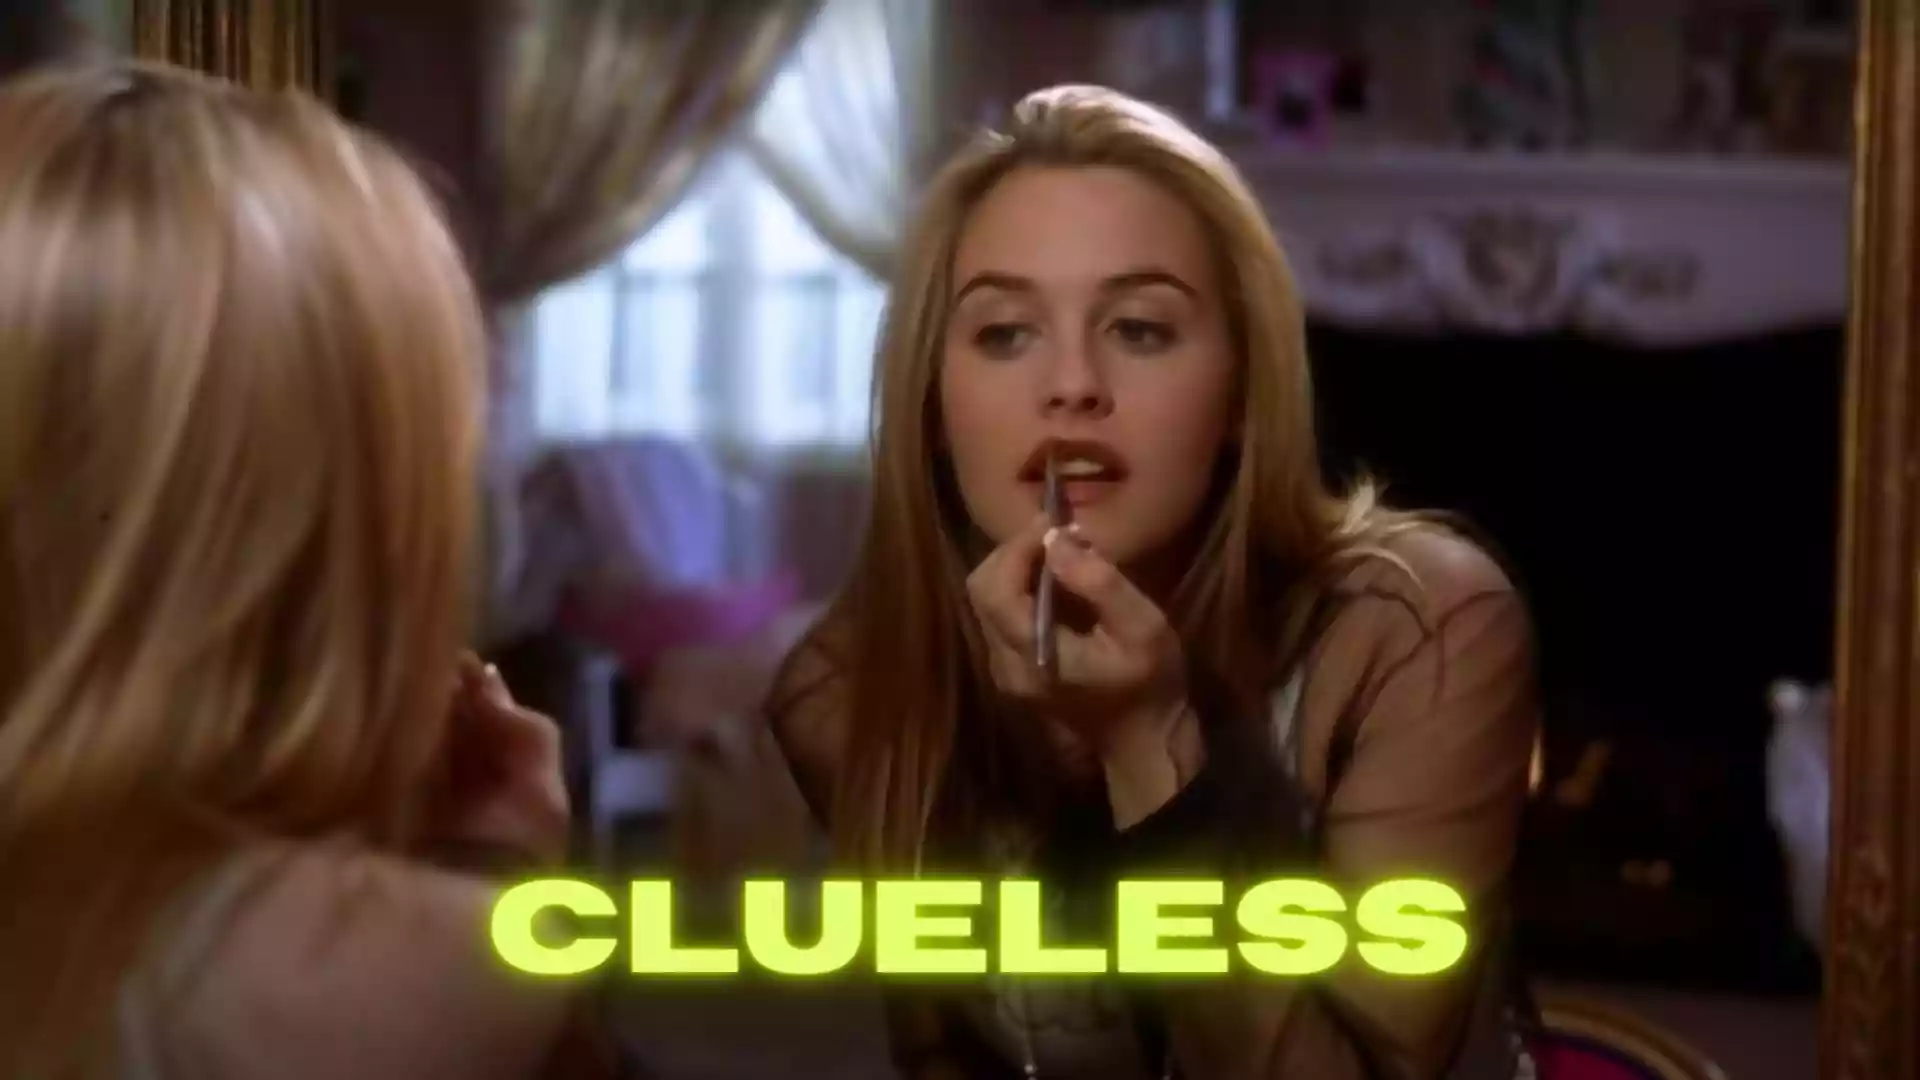 Clueless Parents guide And Age Rating